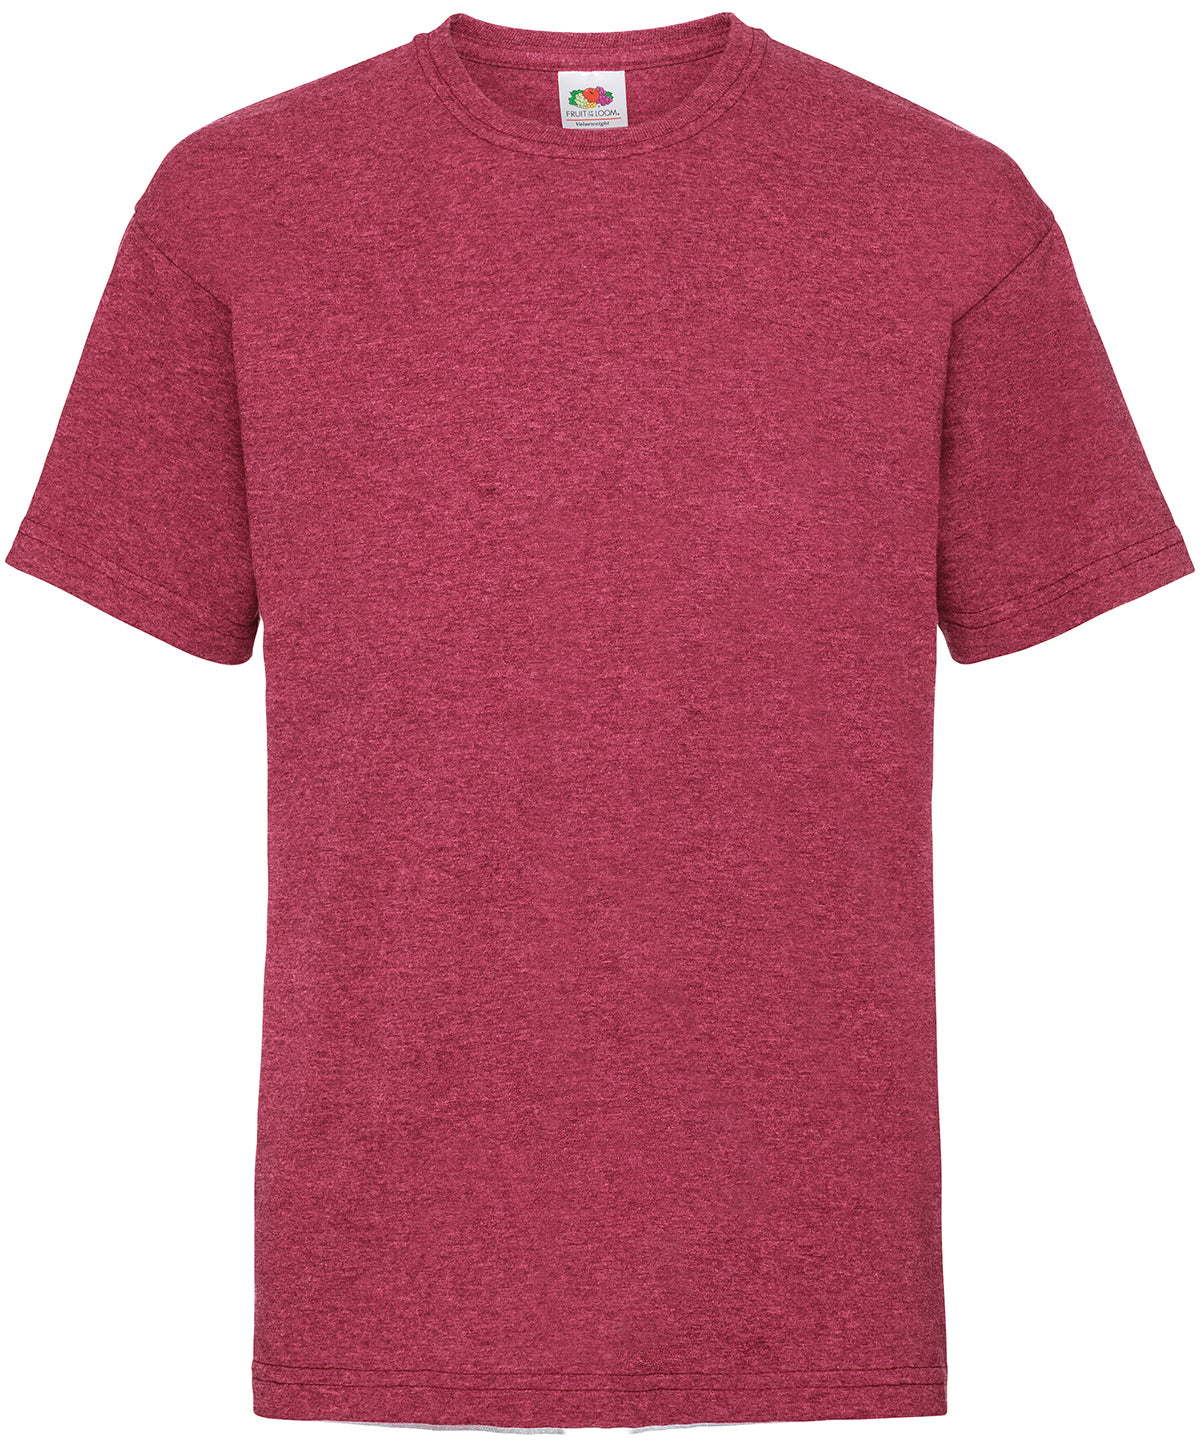 Fruit of the Loom Kids valueweight T Vintage Heather Red